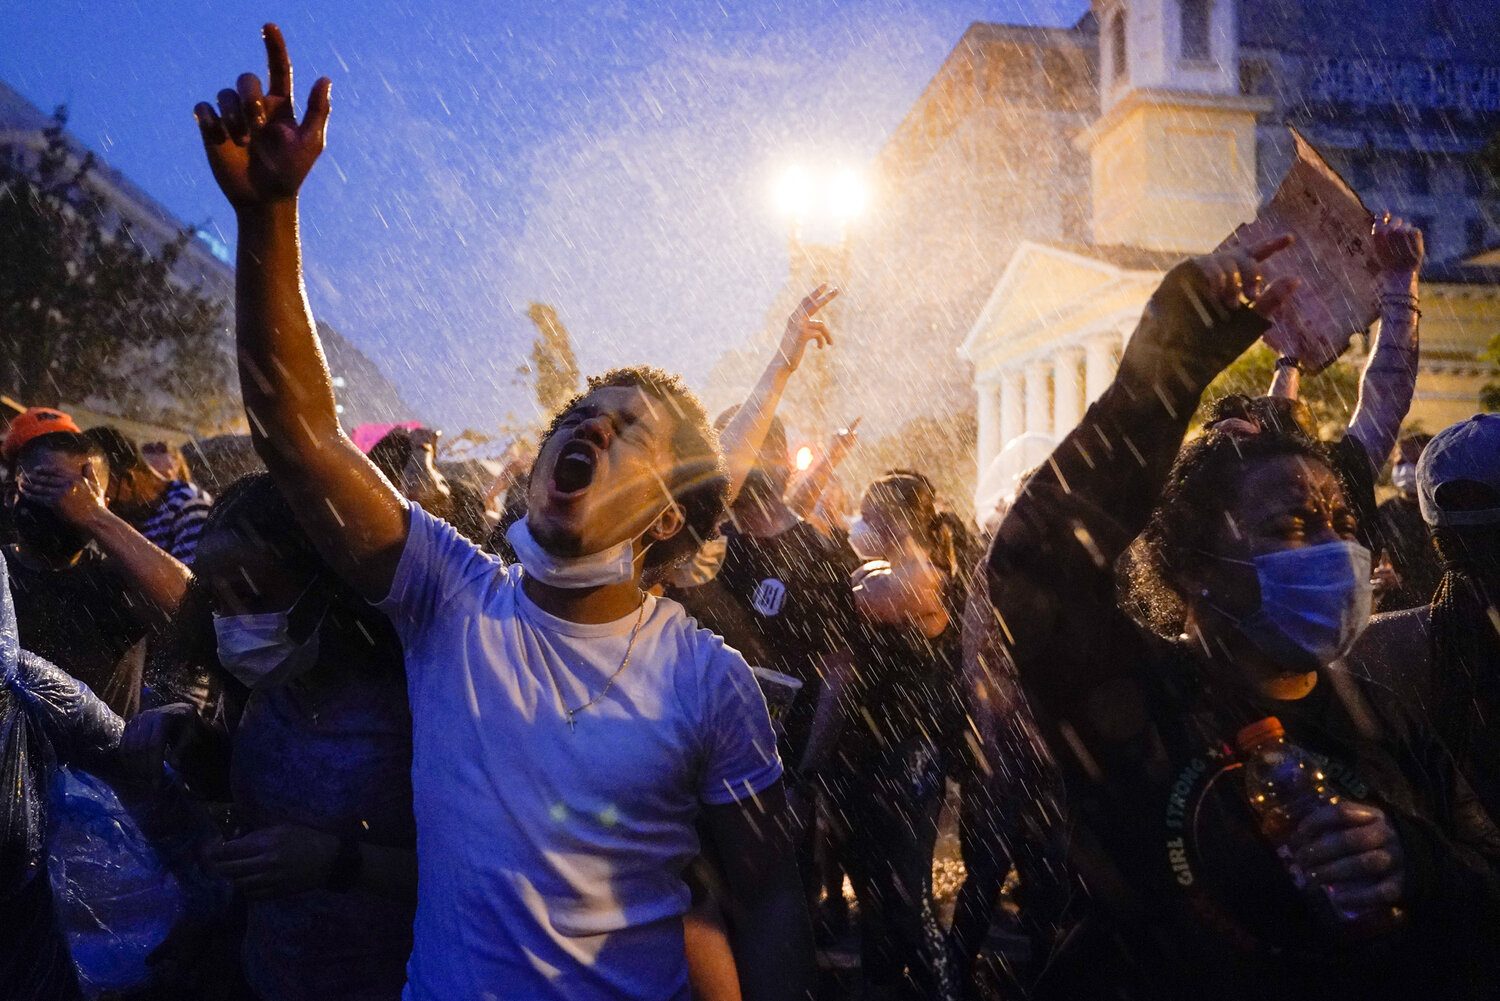  People protest in the rain near the White House in Washington on June 4, 2020, over the death of George Floyd, a Black man who died in Minneapolis after a white police officer pressed a knee into his neck for several minutes. (AP Photo/Evan Vucci) 